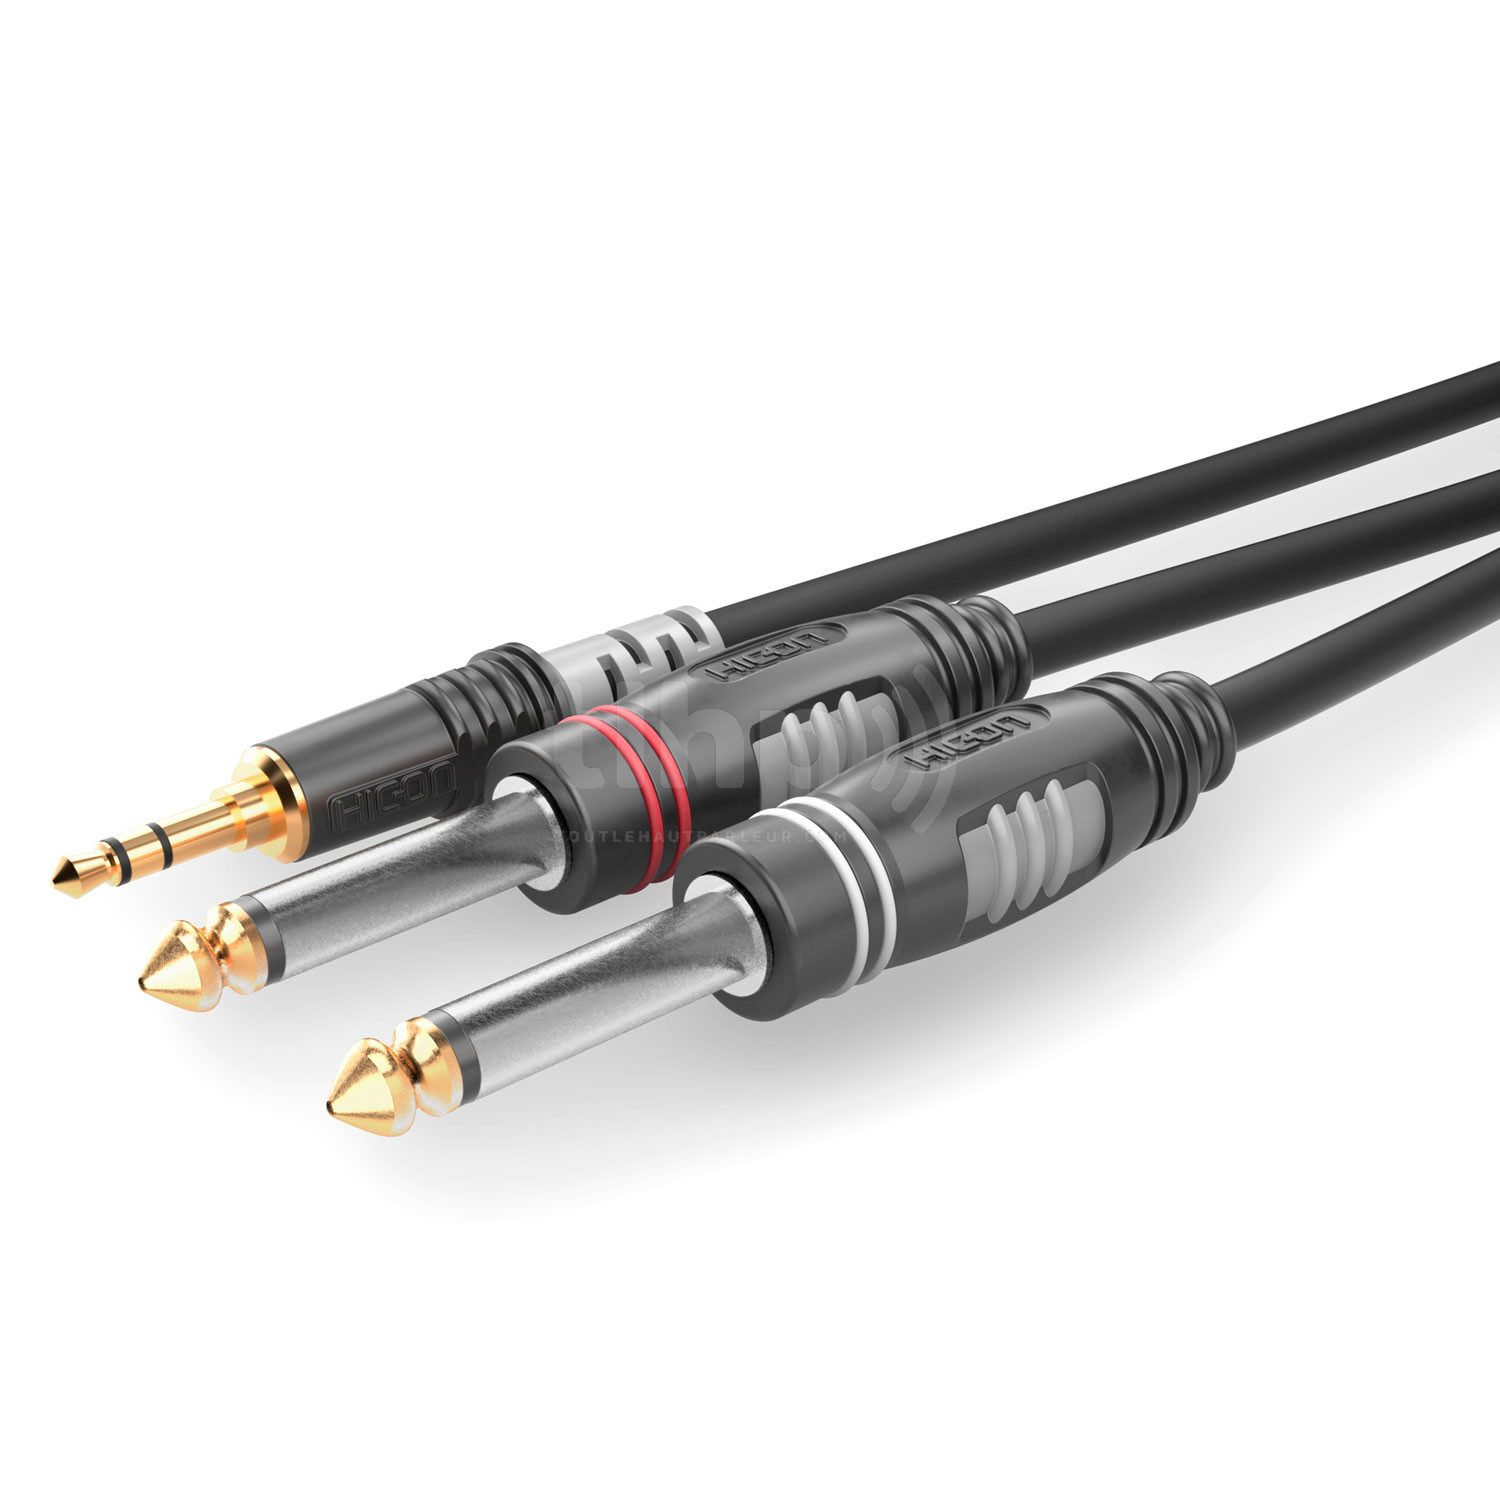 1.5m Y audio cable, with 3.5 mm stereo mini Jack to double 6.35 mm mono